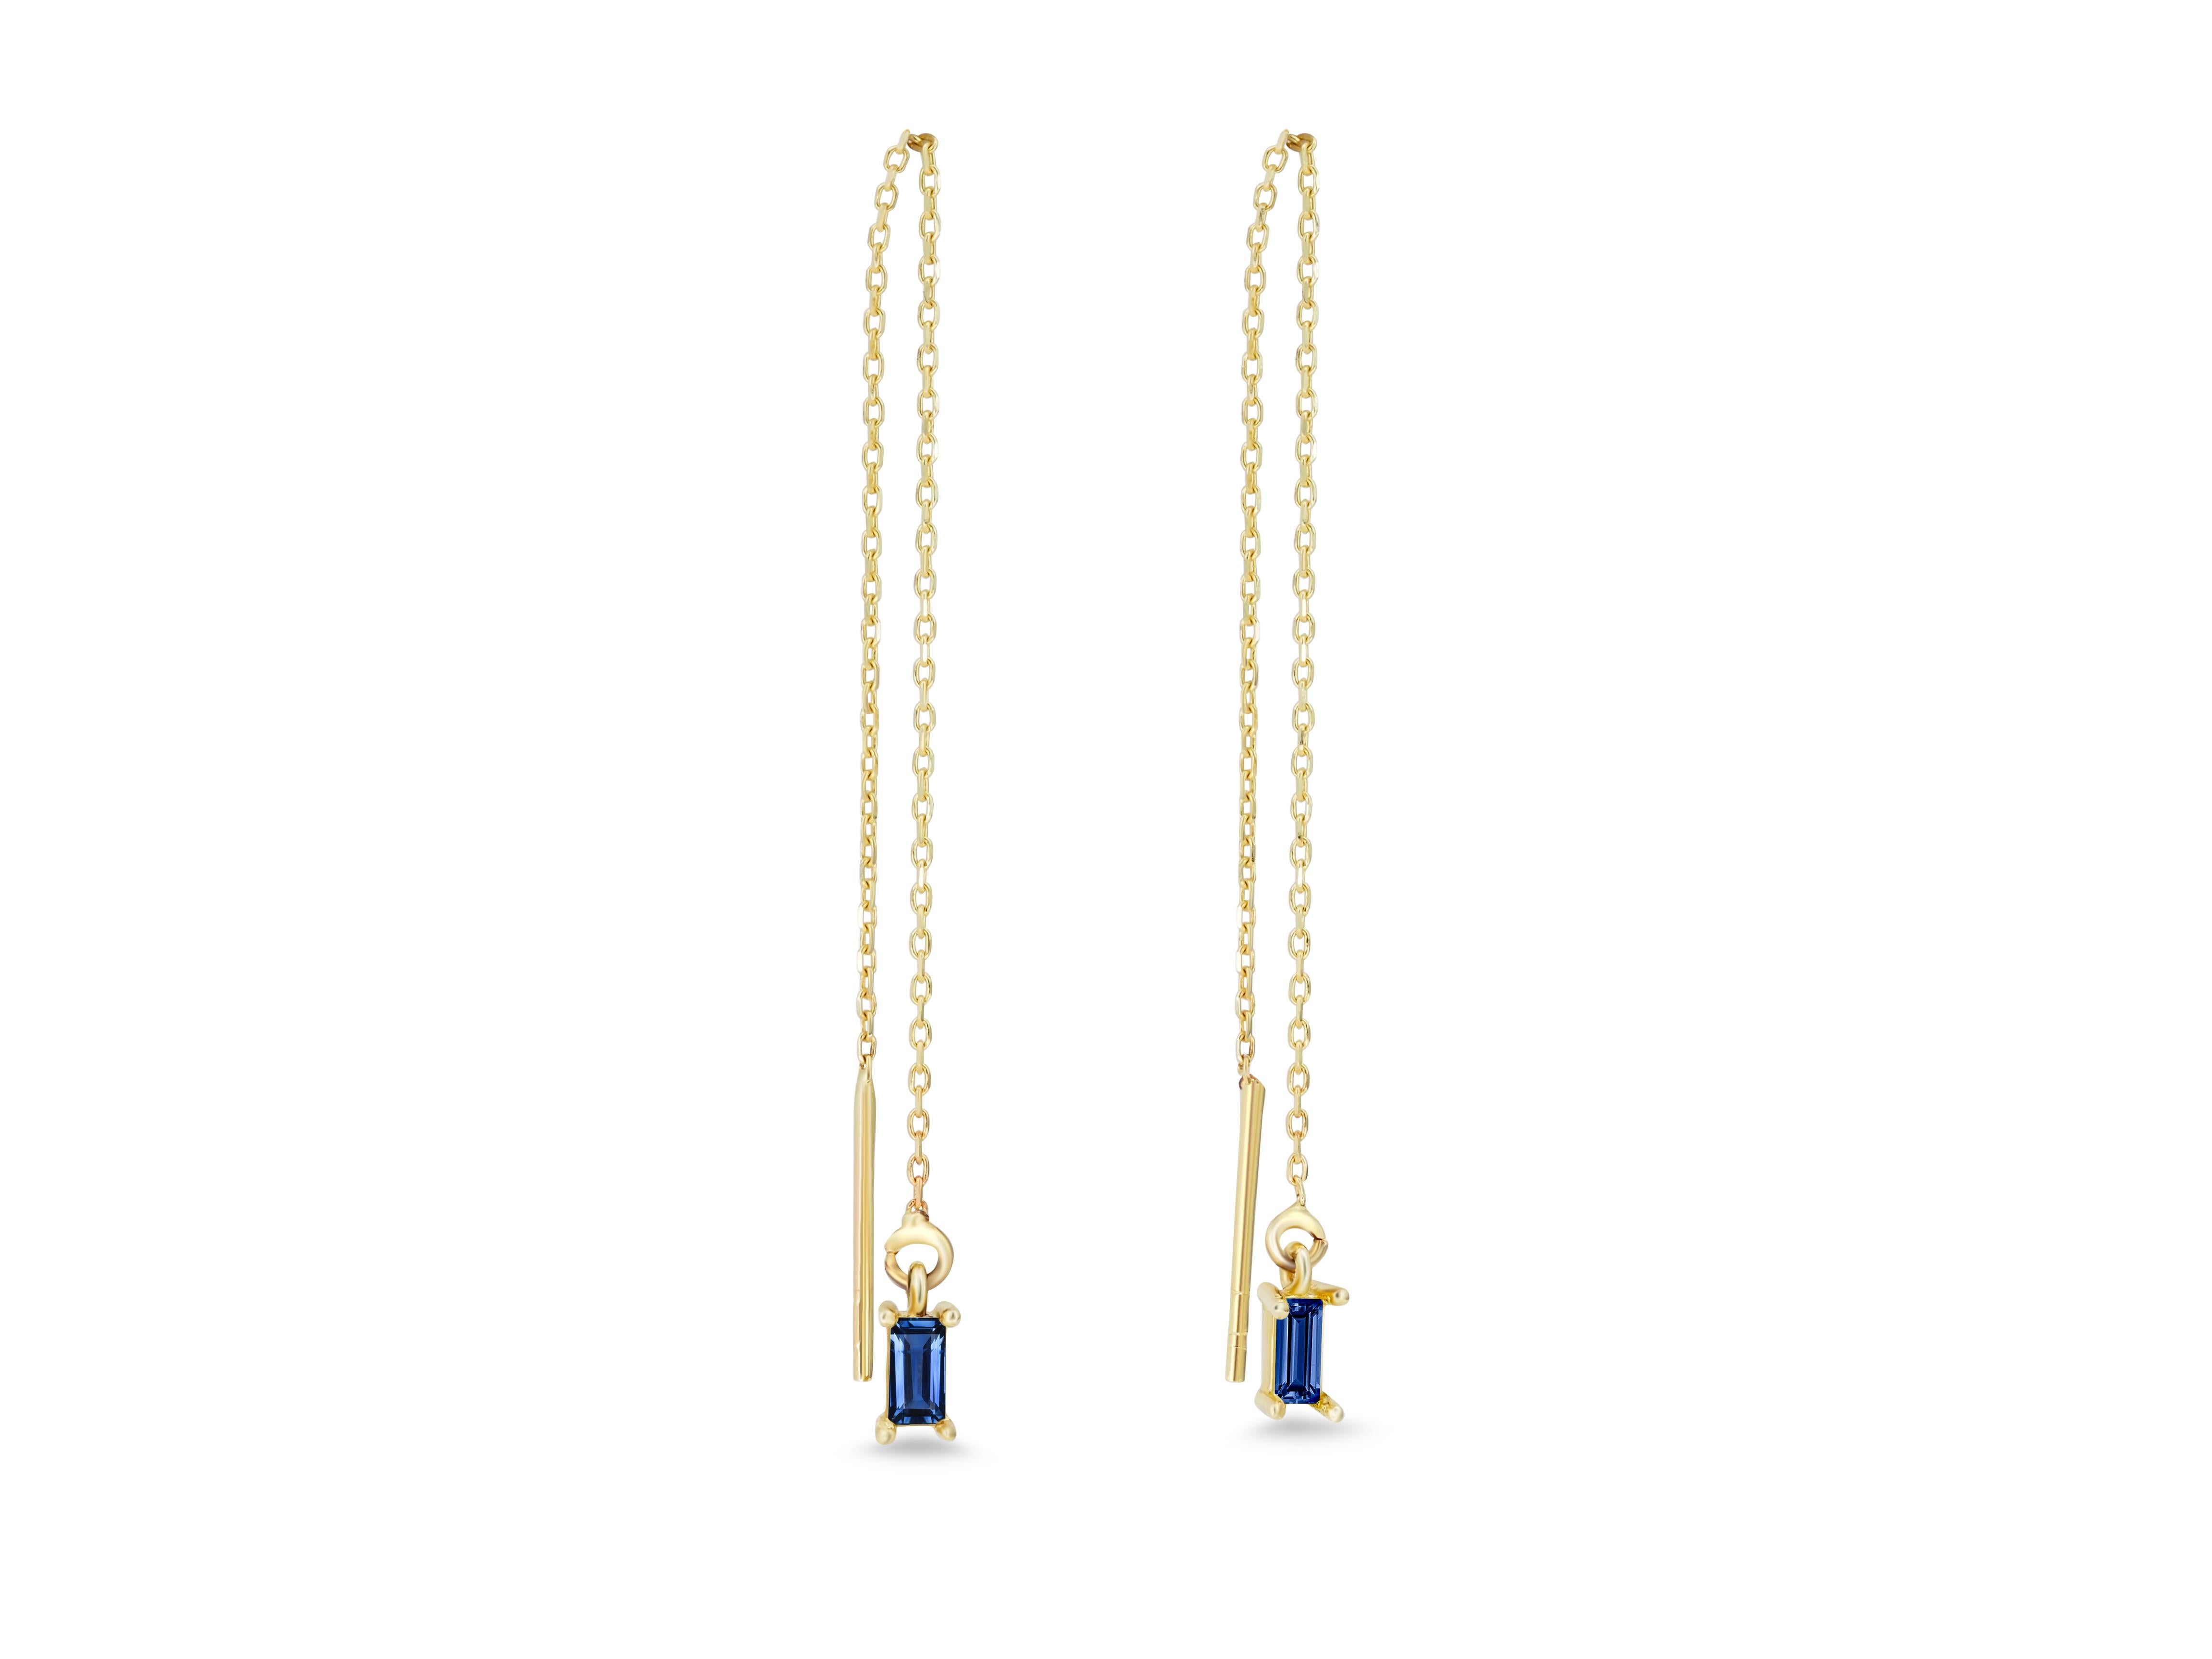 14k Solid Gold Drop Earrings with sapphire. 
Chain Gold Earrings. Sapphire Drop Gold Threaders. Sapphire gold earrings. Baguette earrings.

Metal: 14k gold
Weight: 0.8-0.9 g.
Size: 6.5-6.8 sm.

Central stones: Natural sapphires 2 pieces
Cut: